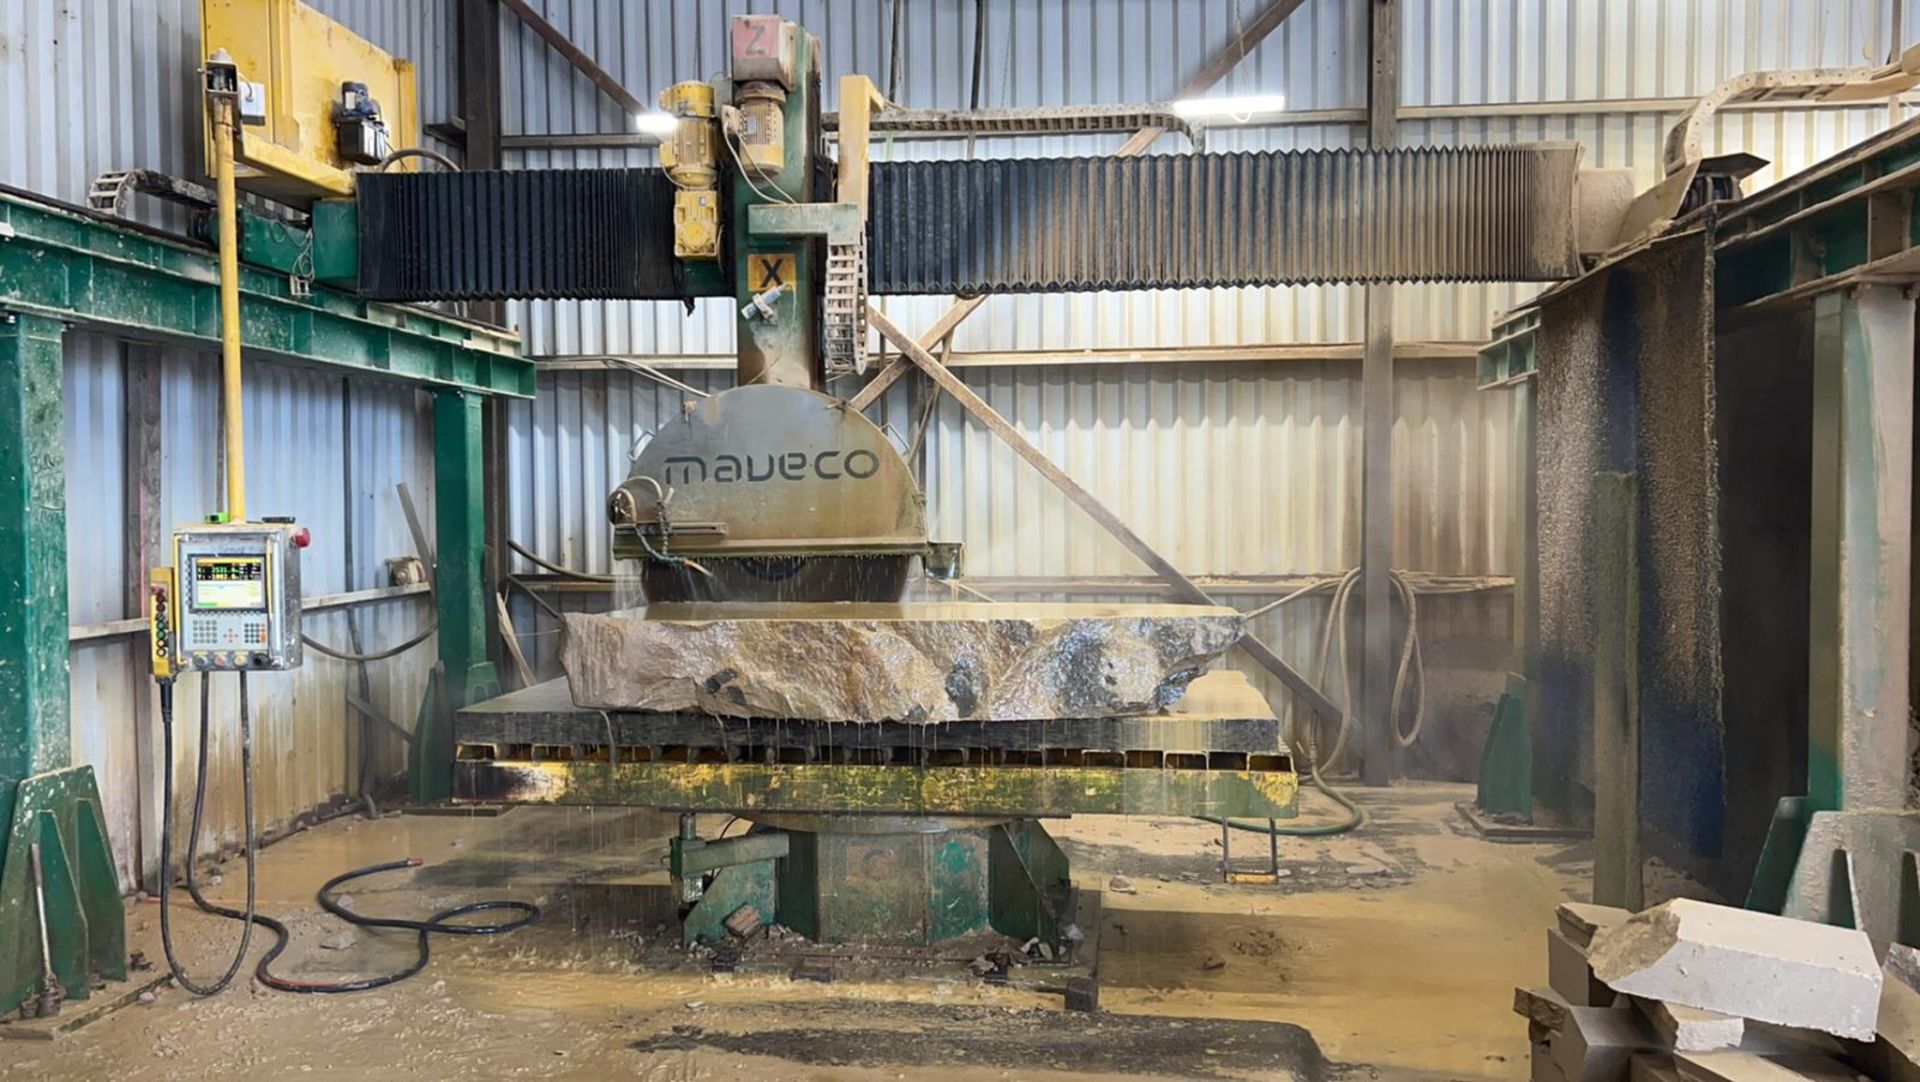 Maveco 1200 automatic Stone Saw Still in use every day Good condition  cuts like new well serviced - Bild 6 aus 6